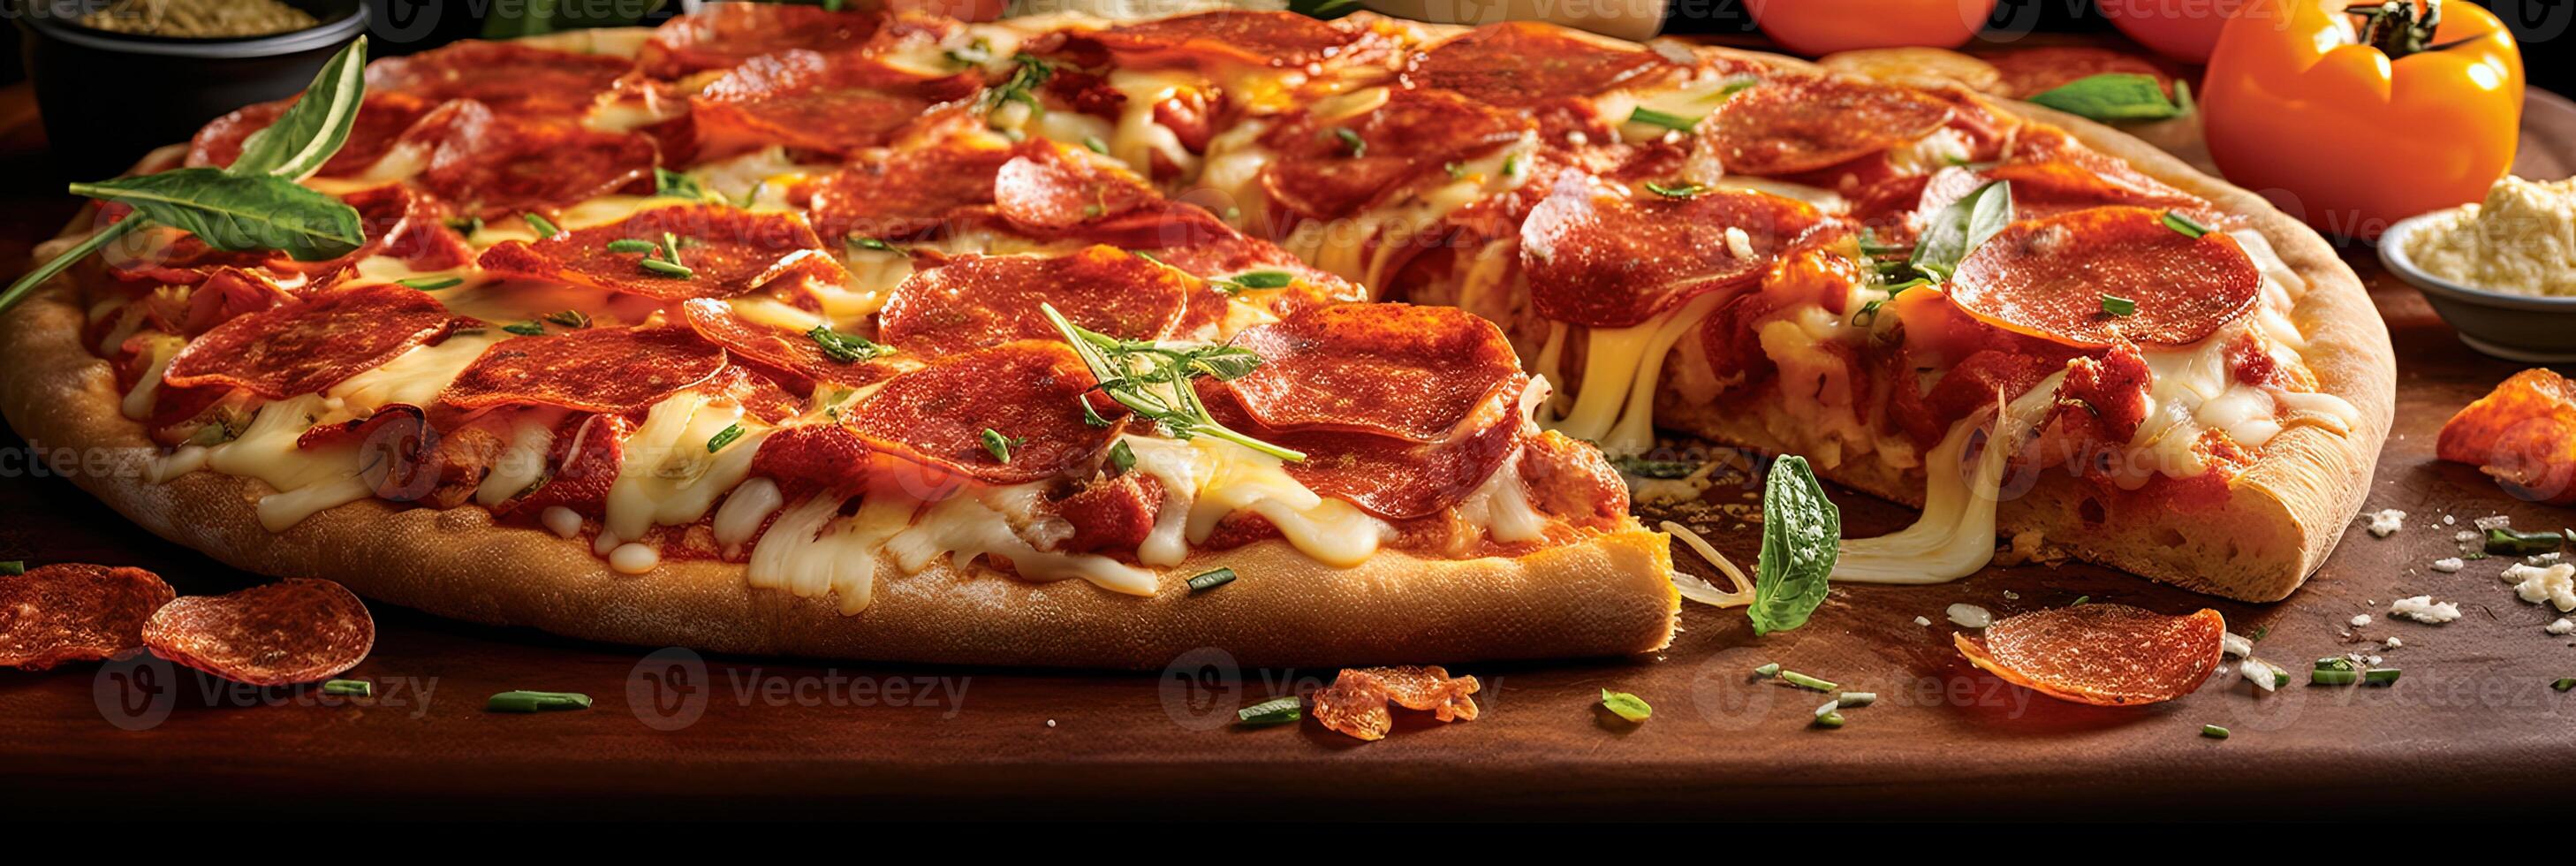 Close up a Slice of Pepperoni Pizza with Melted Cheese and Tomato on Wooden Table. photo